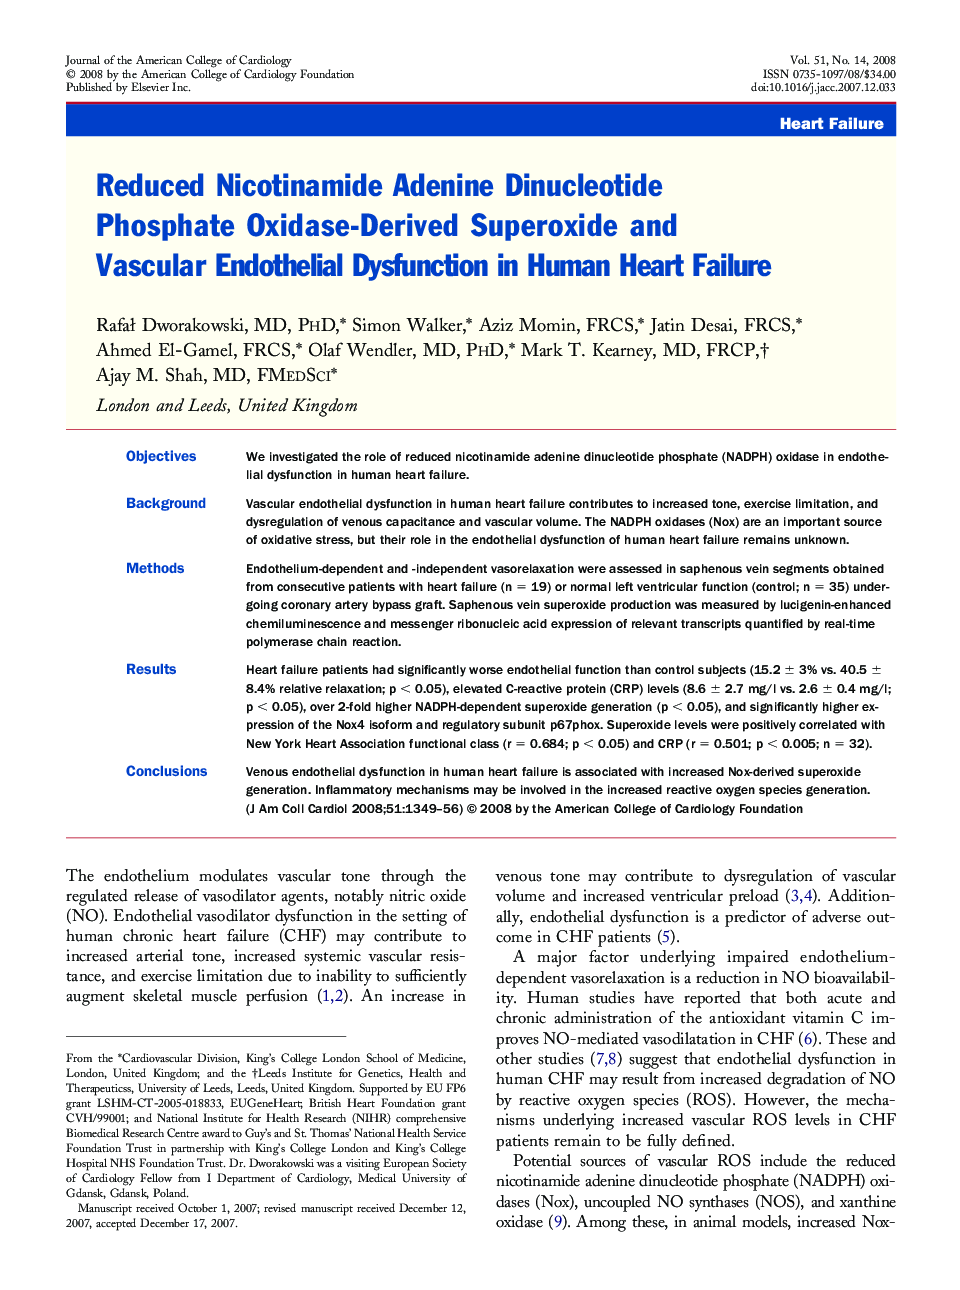 Reduced Nicotinamide Adenine Dinucleotide Phosphate Oxidase-Derived Superoxide and Vascular Endothelial Dysfunction in Human Heart Failure 